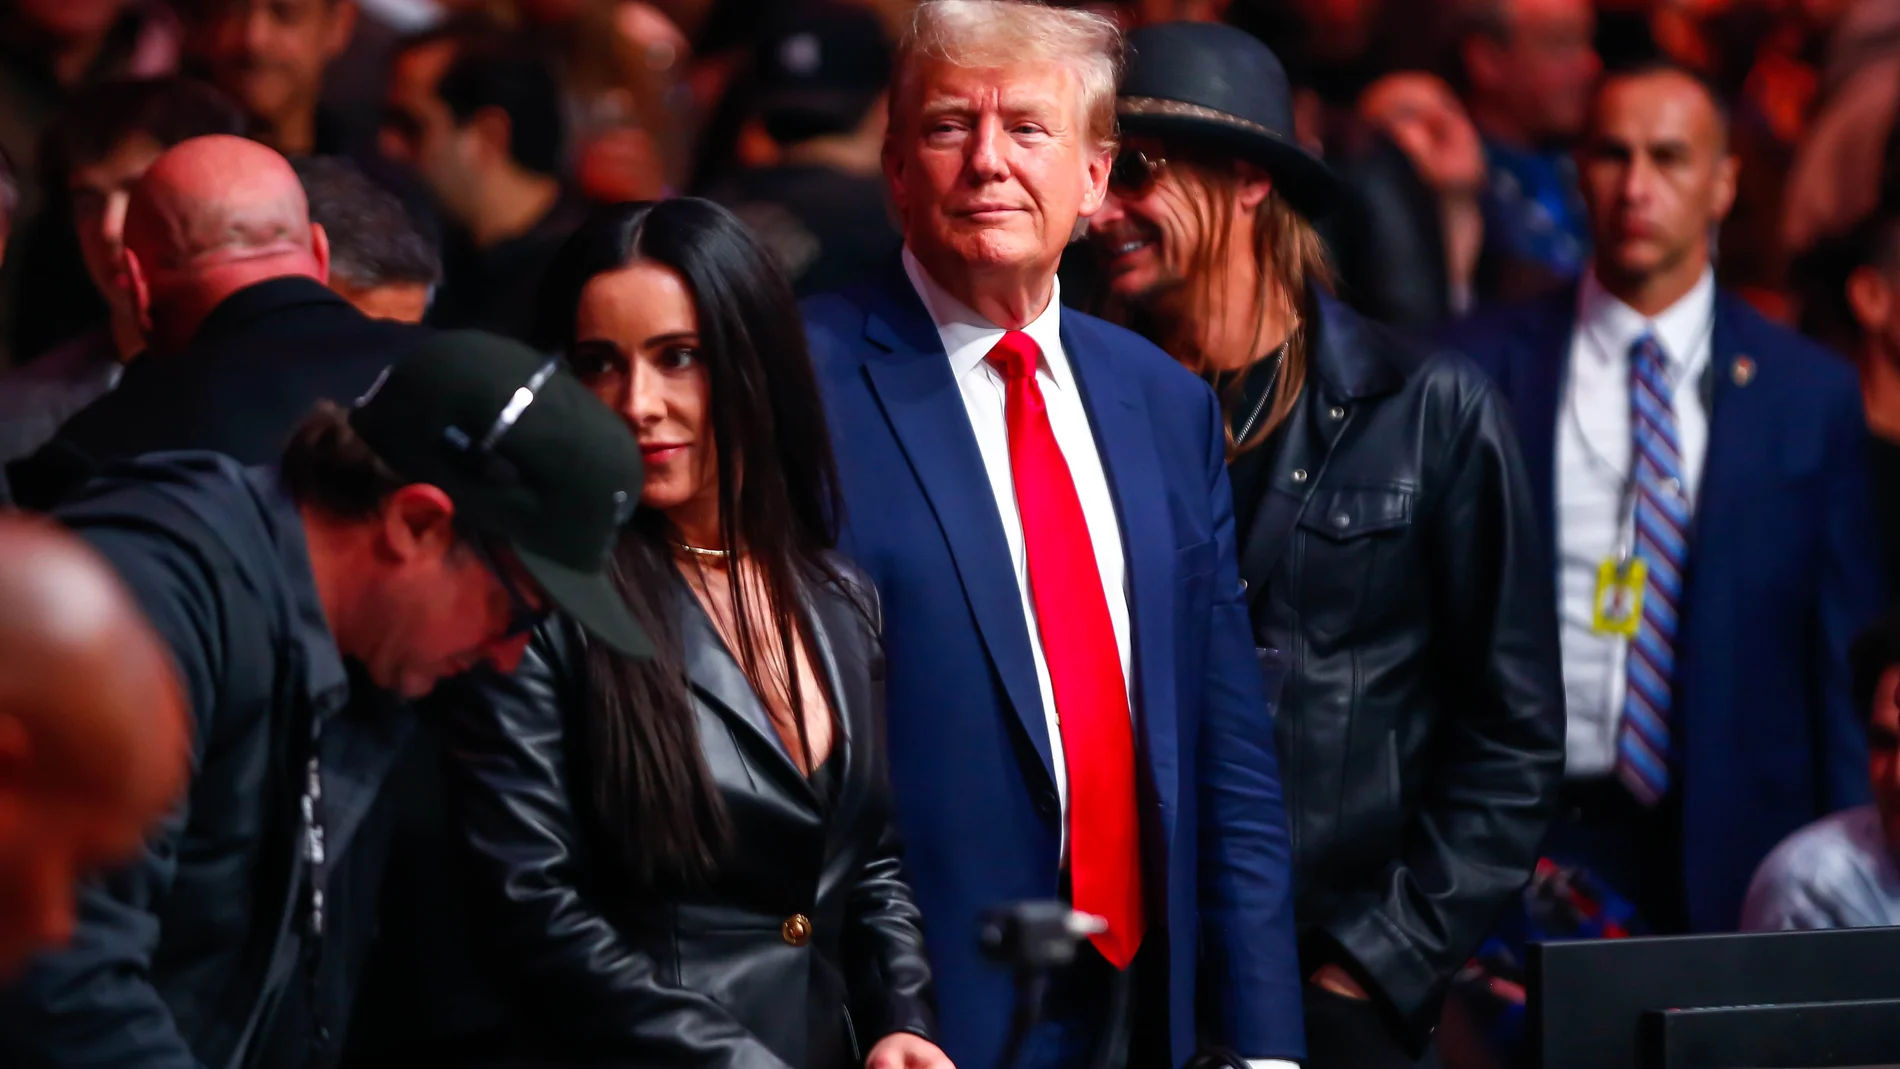 November 11, 2023, New York City, NY, USA: Former U.S. President Donald Trump is seen during the UFC 295 event at Madison Square Garden on November 11, 2023 in New York City. 11/11/2023